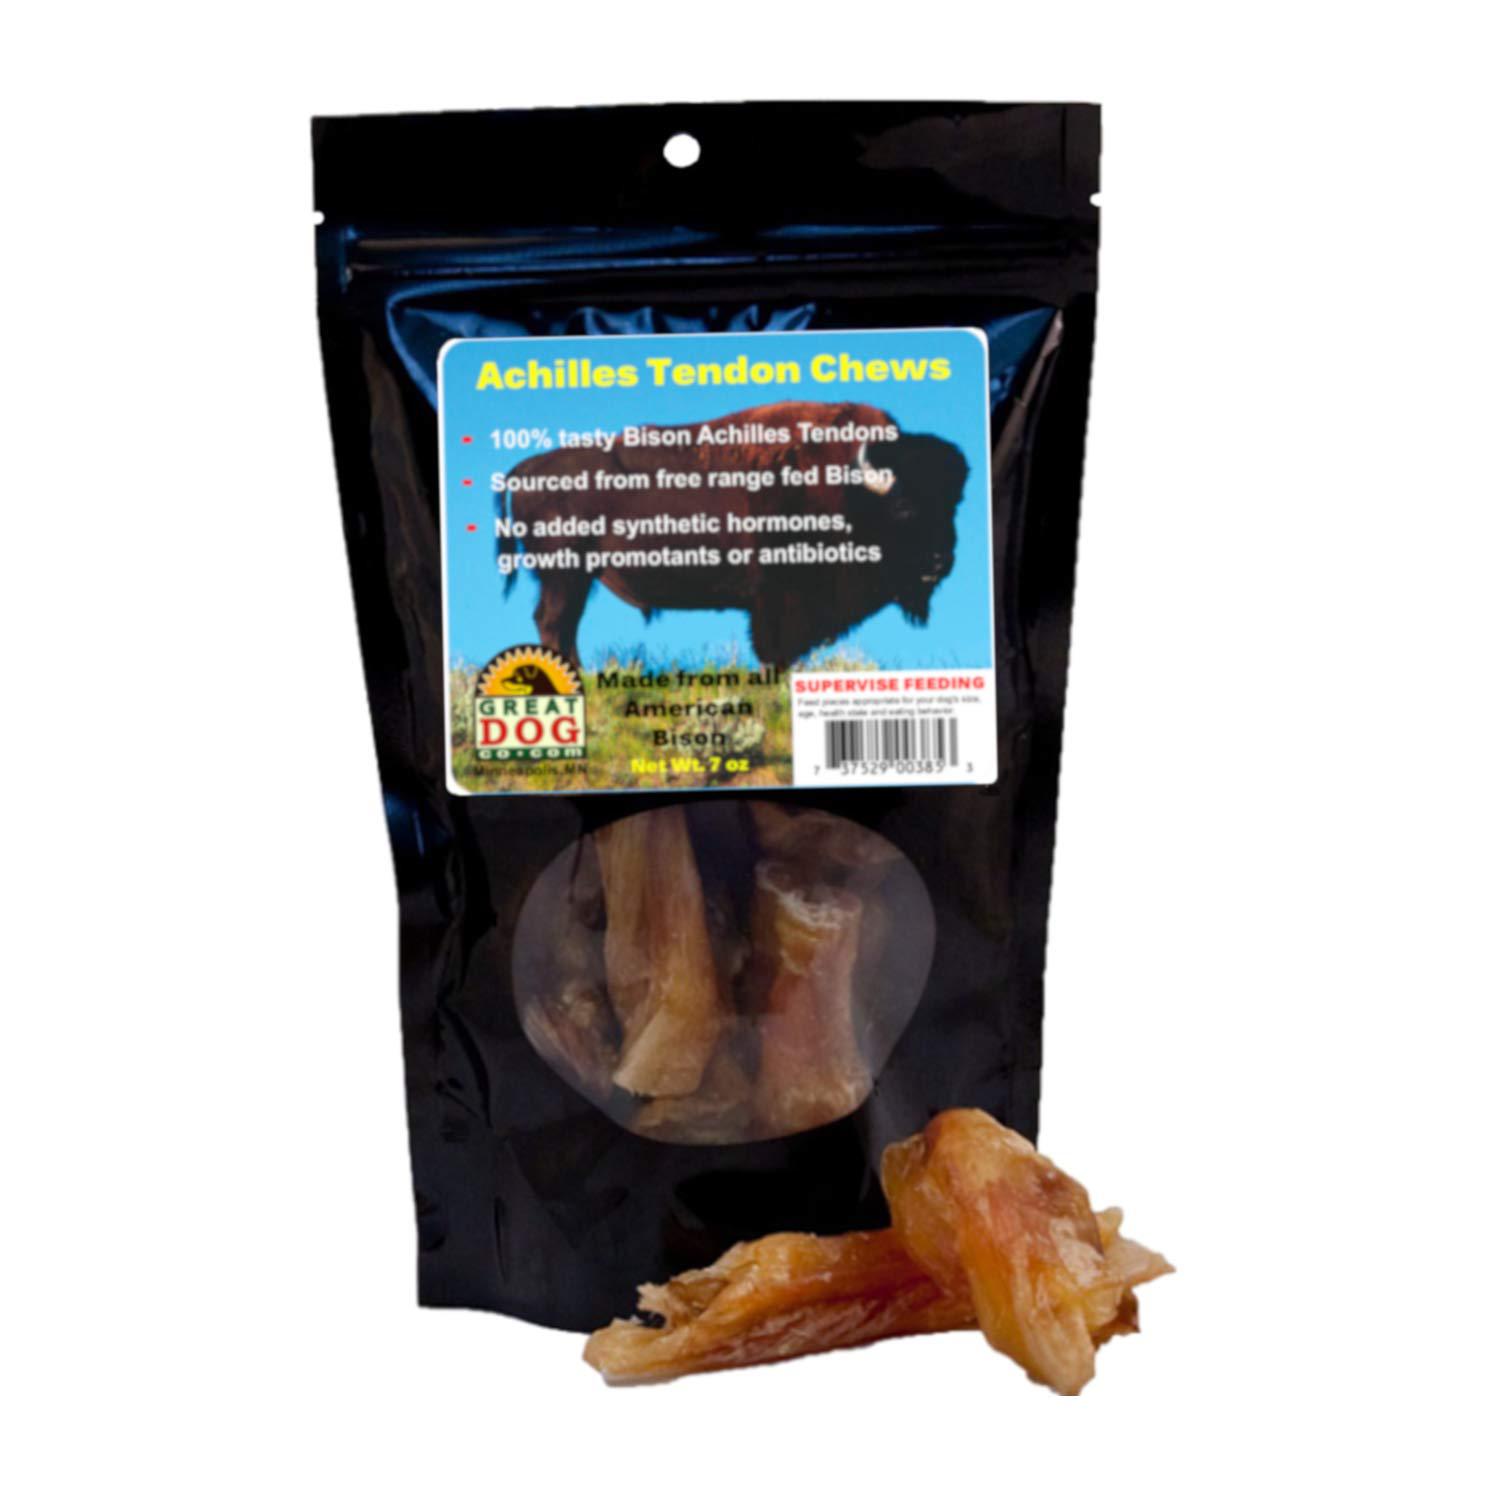 great dog bison achilles tendon chews 7 oz. bag - sourced & made in usa